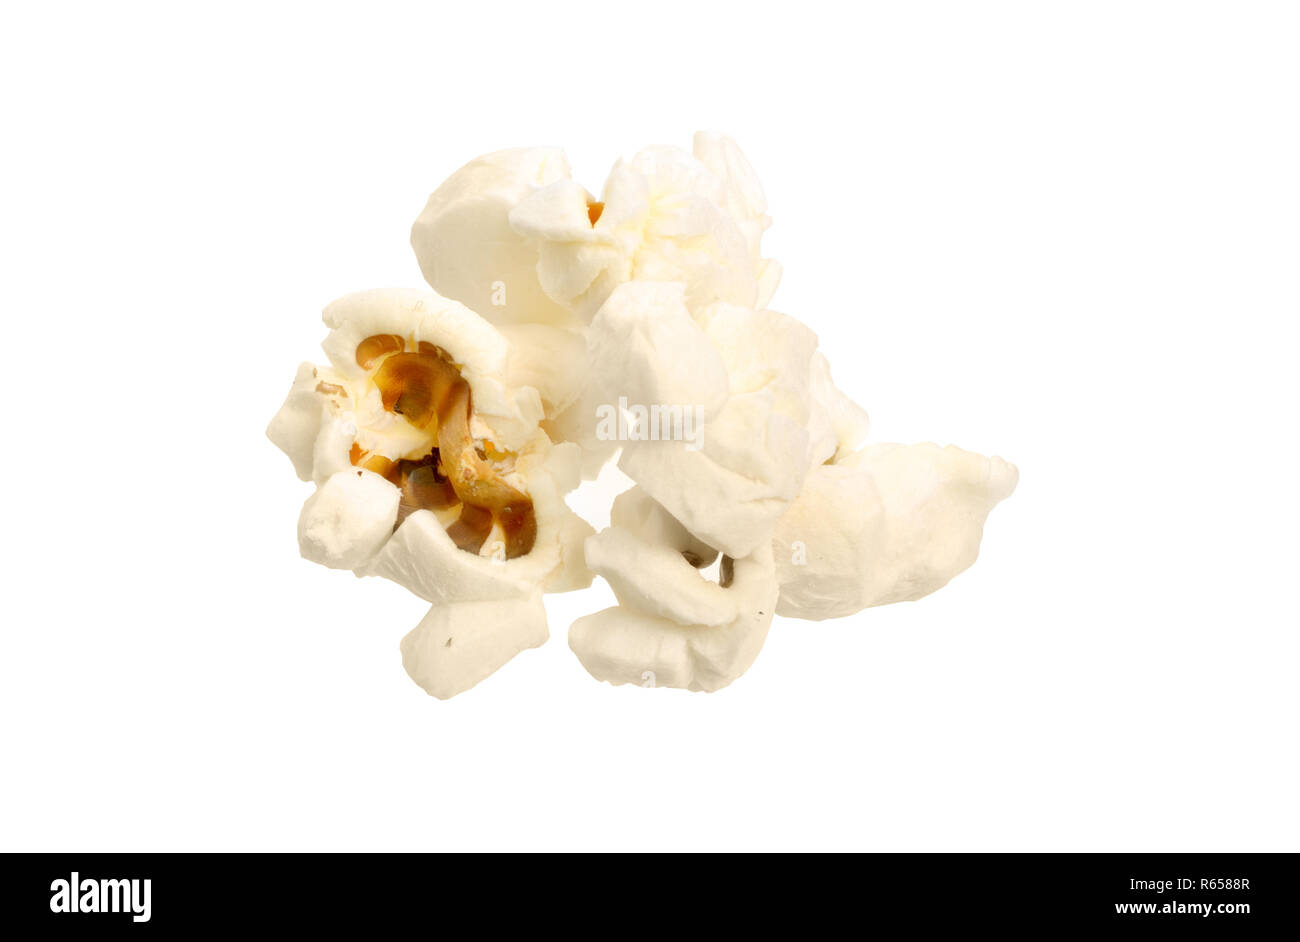 Popcorn isolated on a white background. Full depth of field. Stock Photo